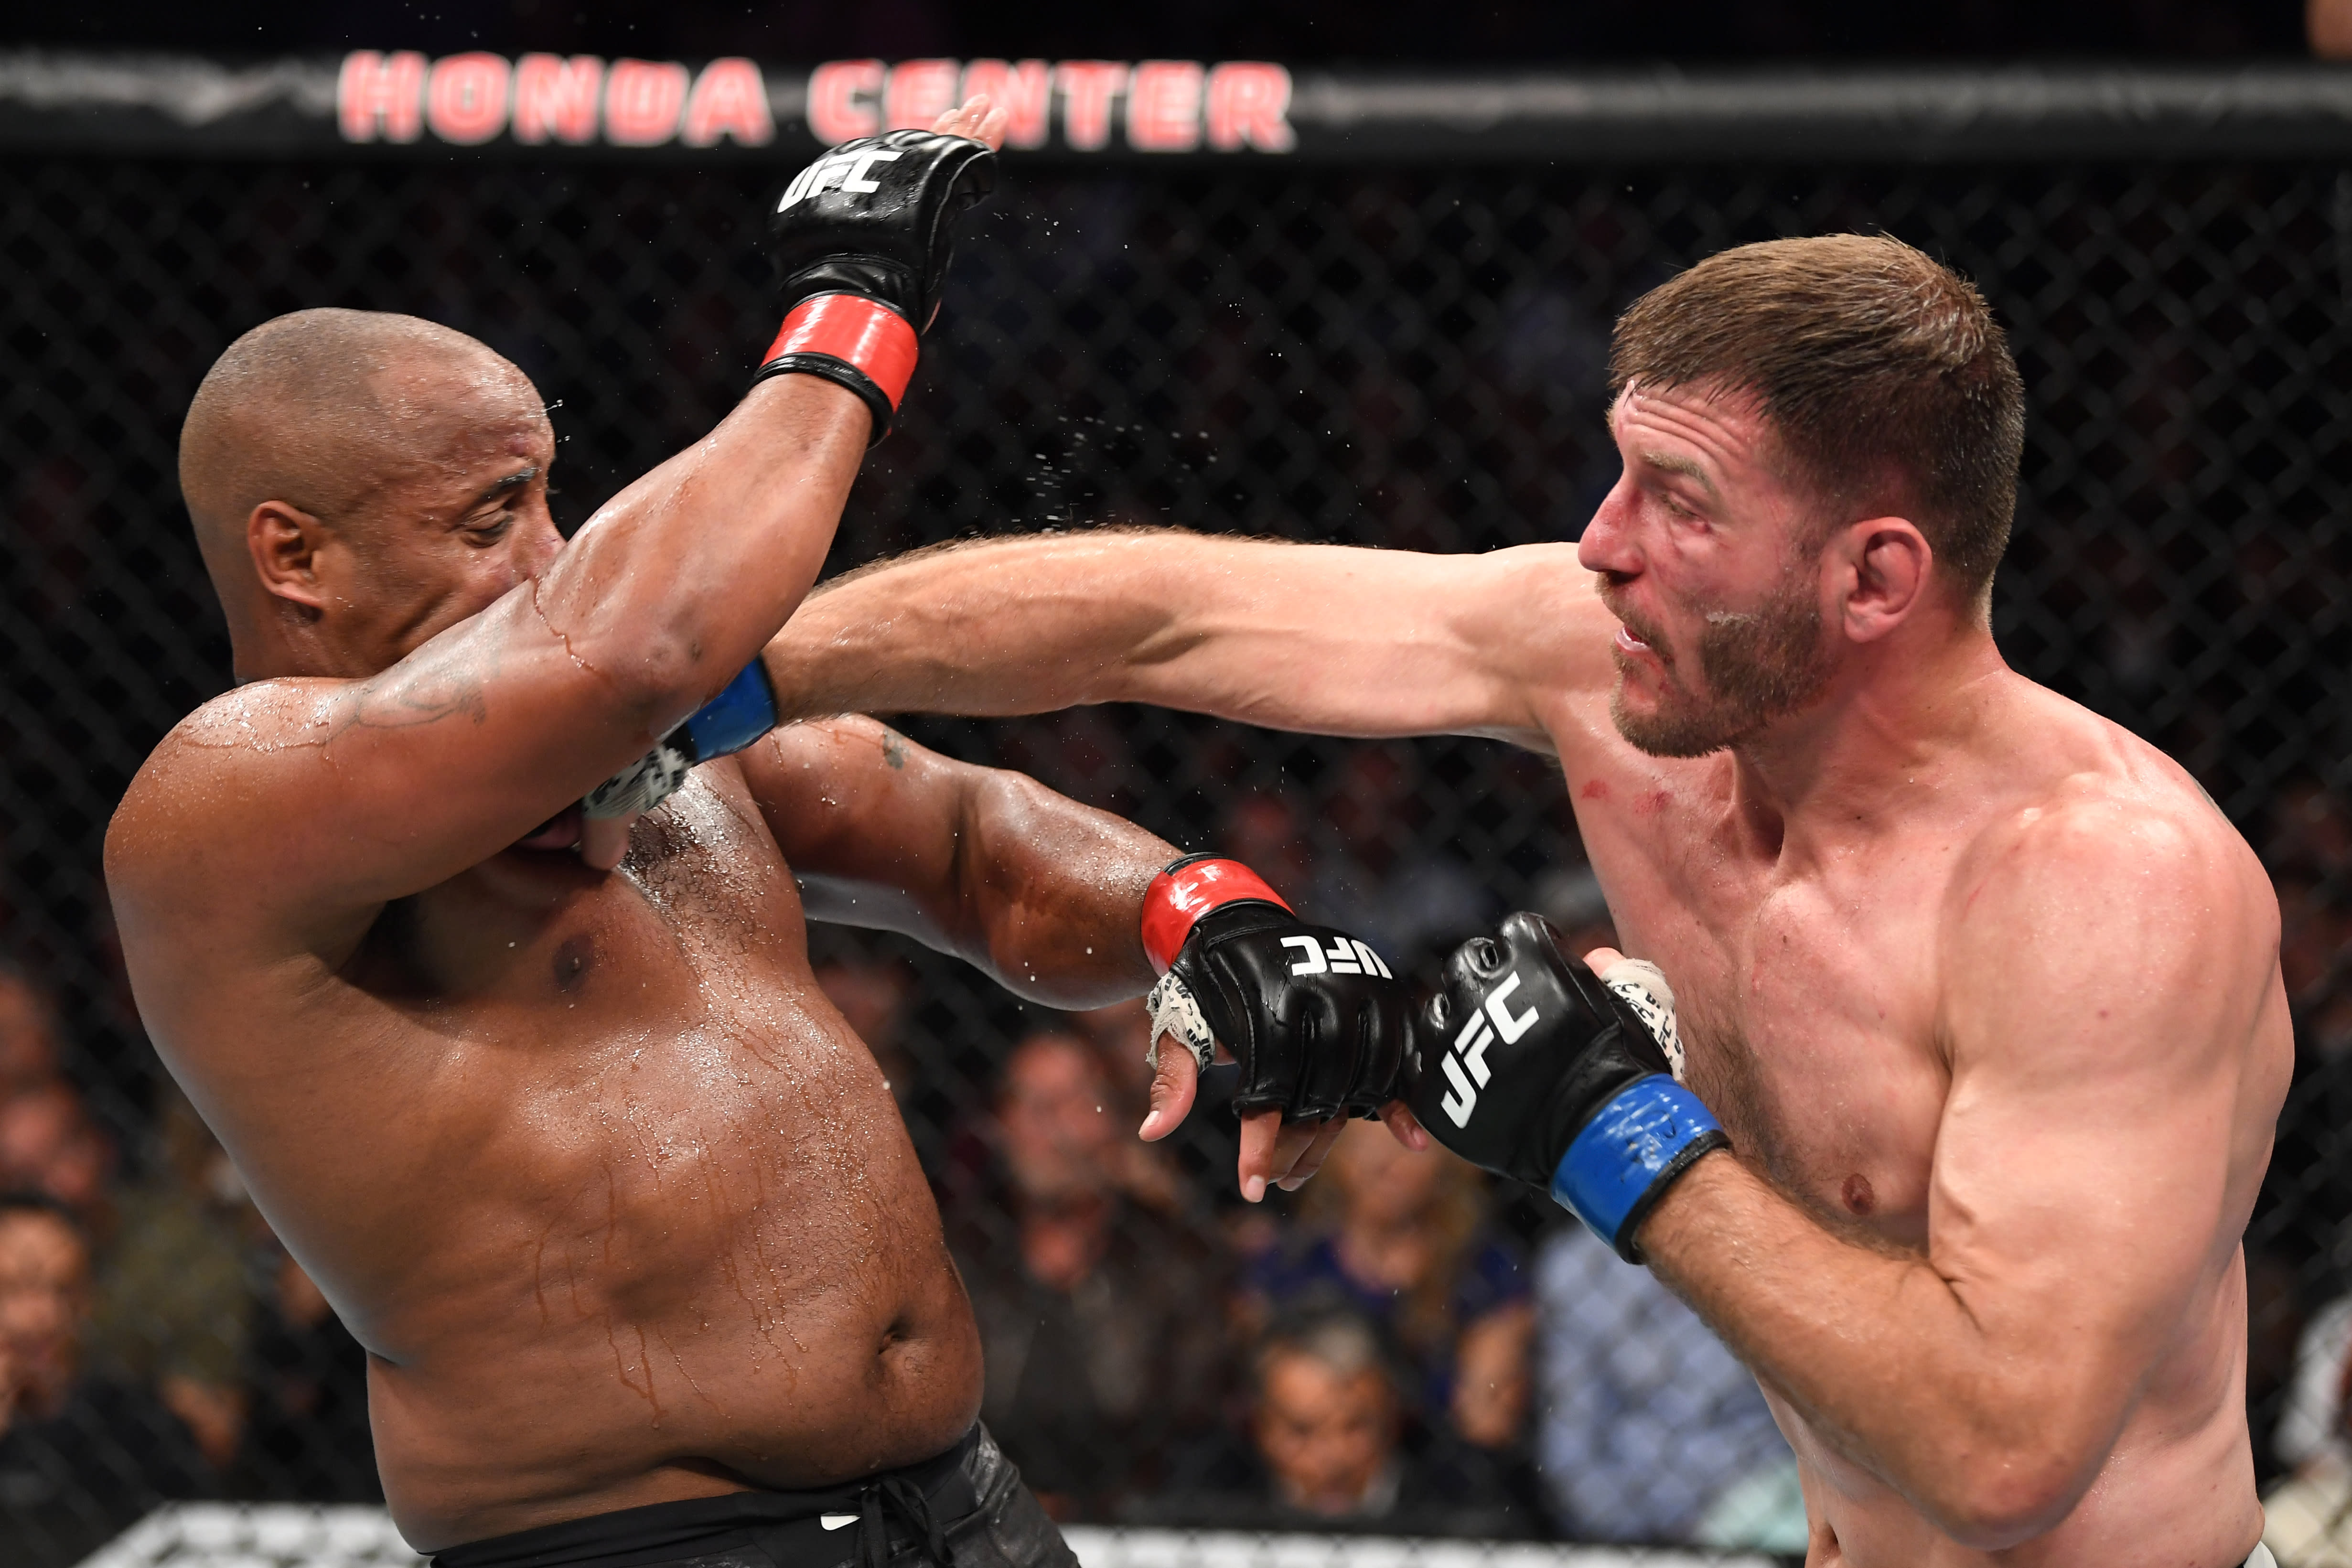 UFC: Who's the most accomplished heavyweight in MMA history?